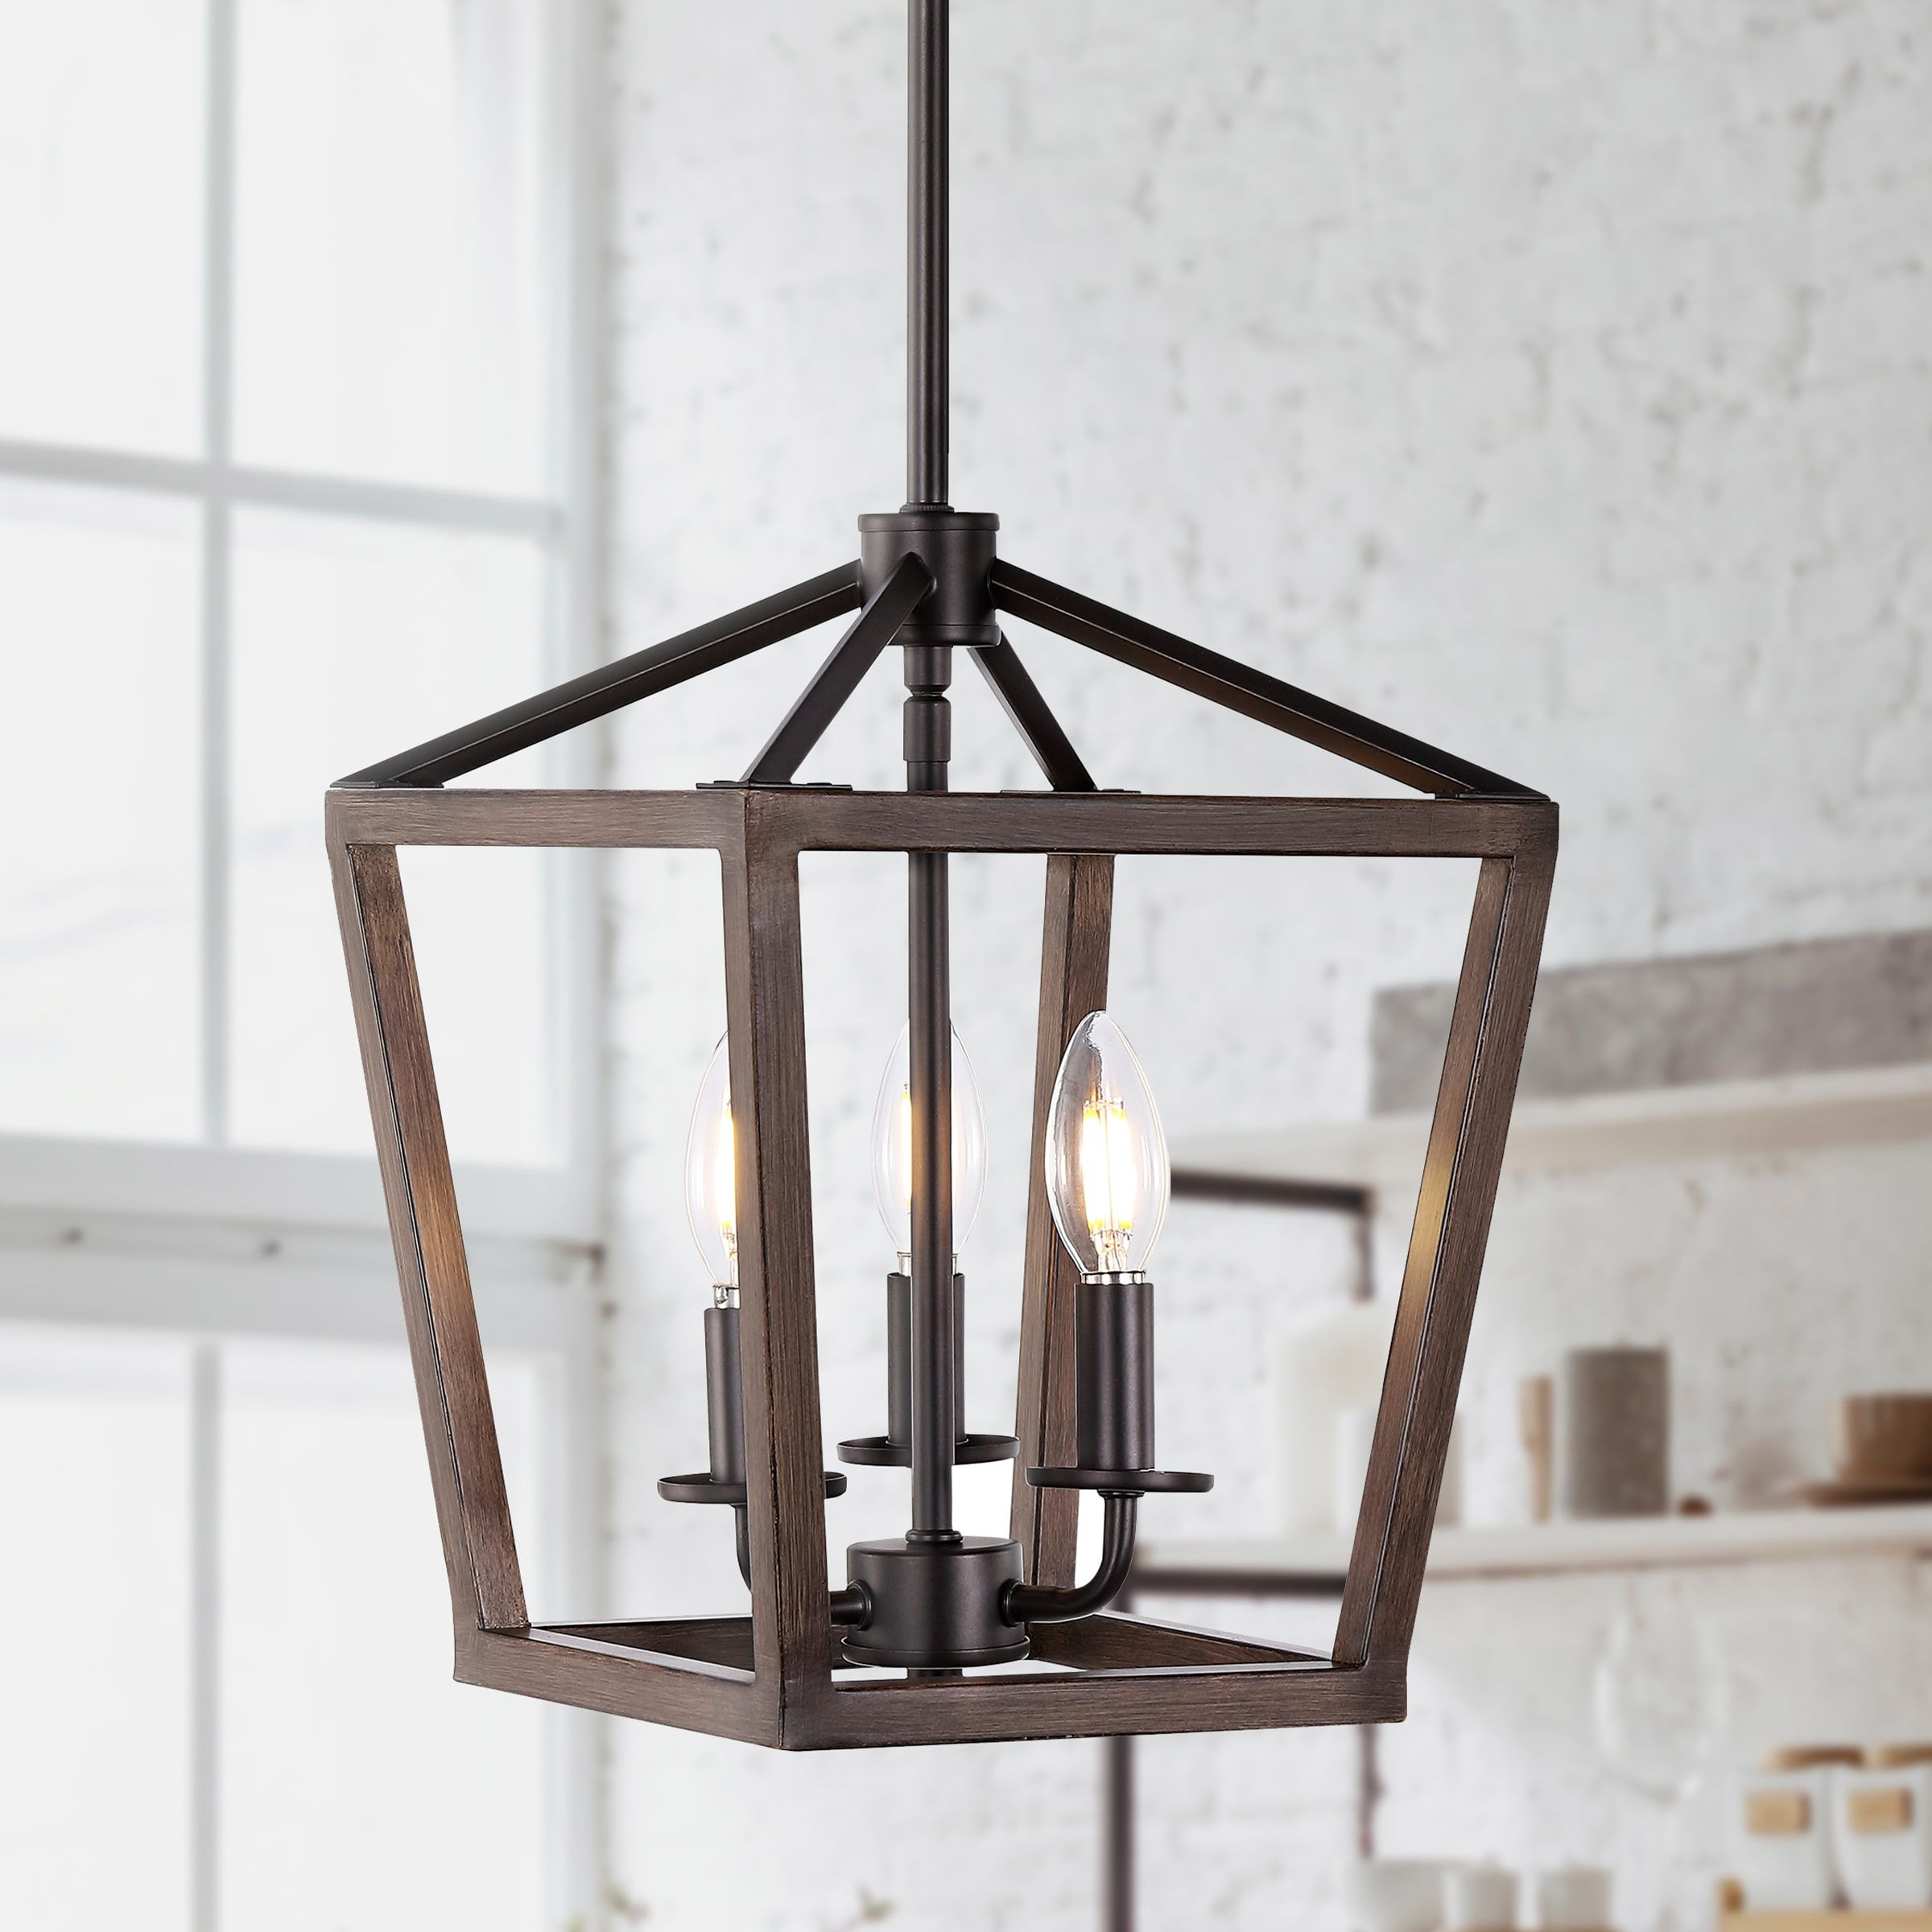 Preferred Rustic Gray Lantern Chandeliers In Jonathan Y Oria Industrial Rustic 3 Light Oil Rubbed Bronze Farmhouse  Lantern Led Pendant Light In The Pendant Lighting Department At Lowes (View 9 of 10)